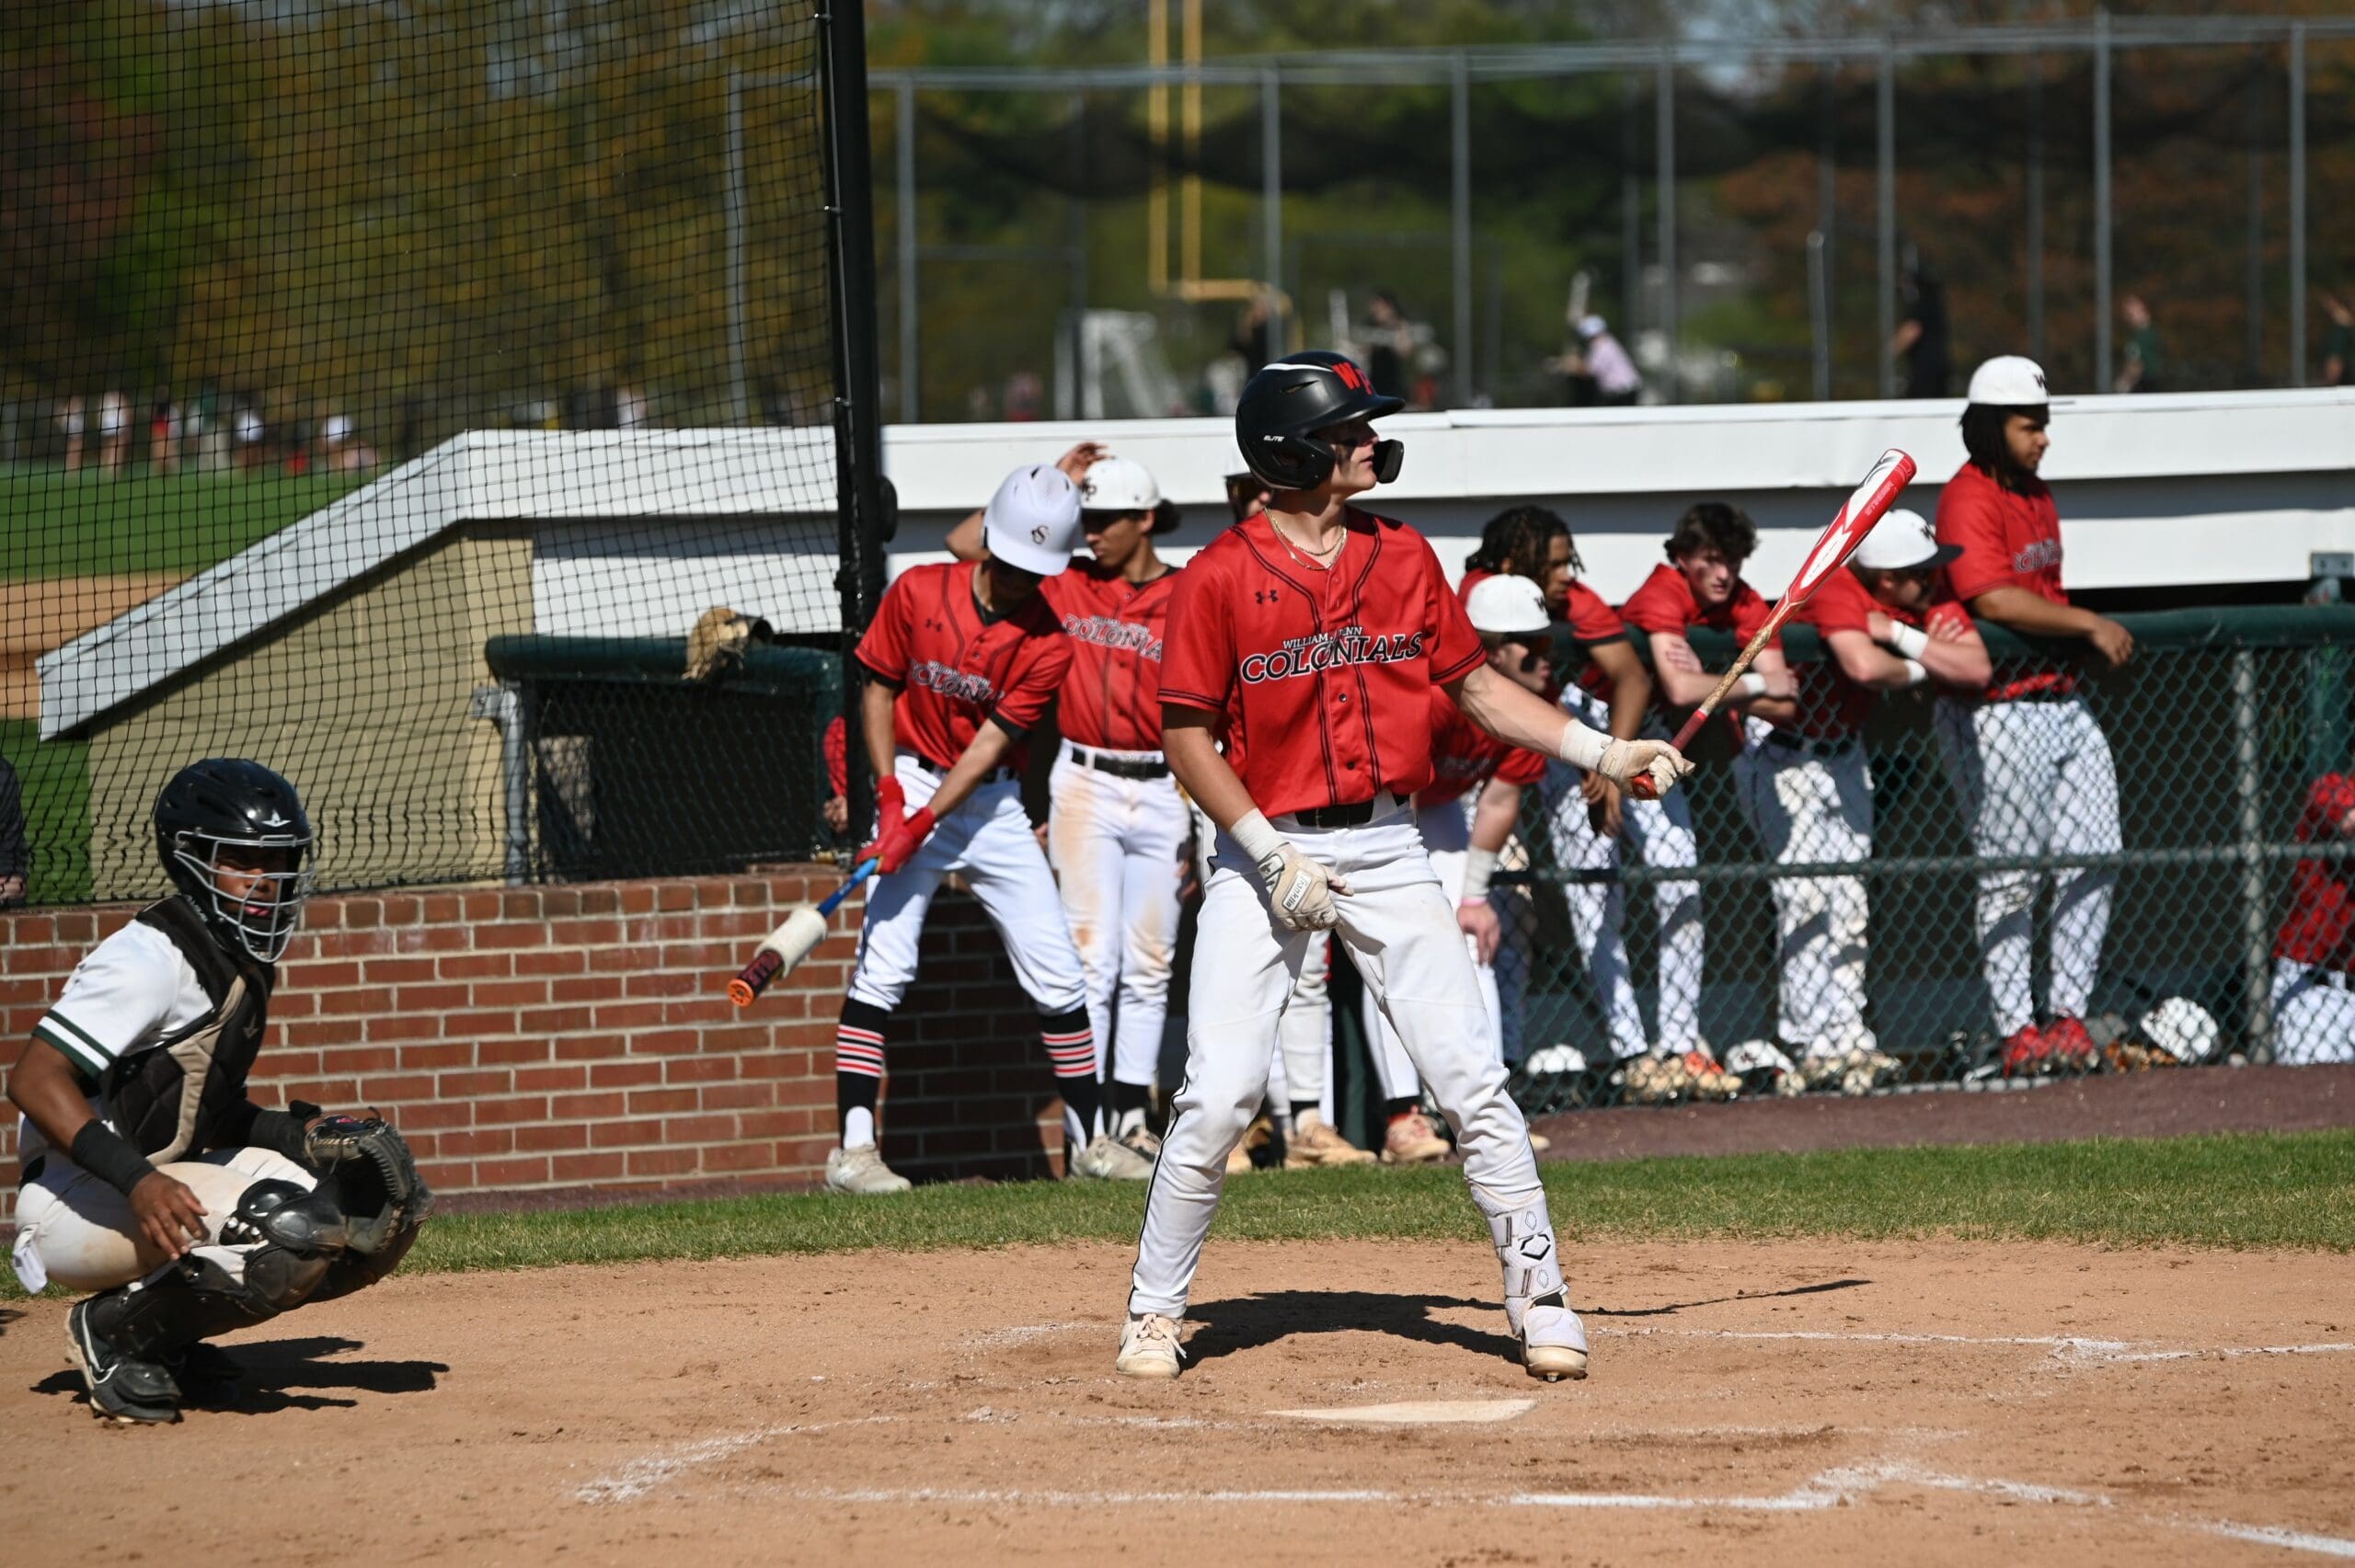 William Penn baseball Colby Gilbert hit a go ahead three run home run to lift the Colonials over Saint Marks. Photo by Nick Halliday scaled